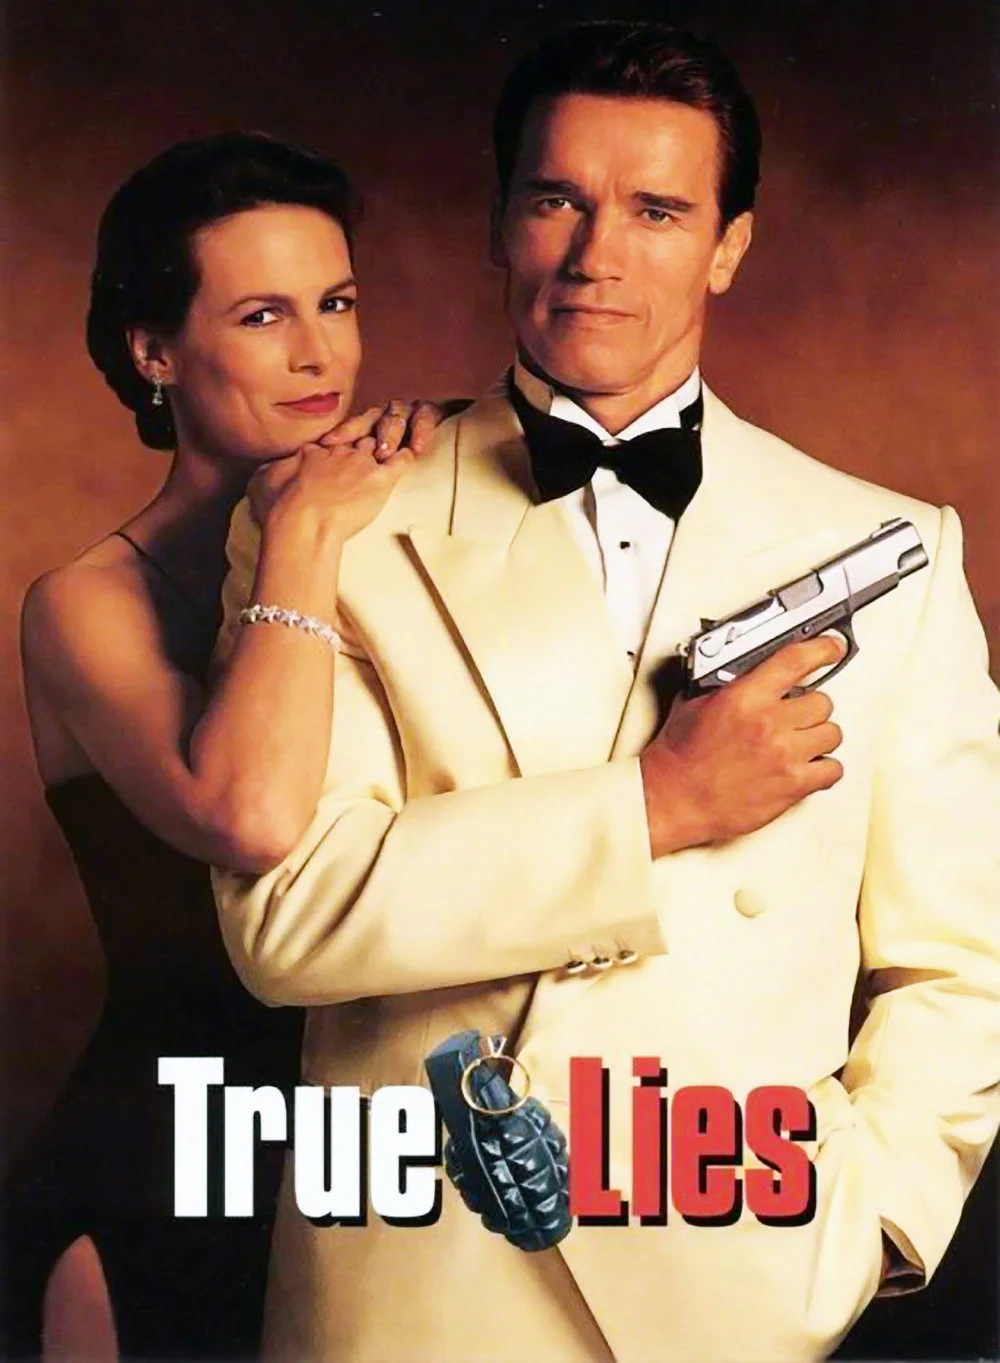 The drama version of "True Lies‎" has been ordered by CBS for an entire season